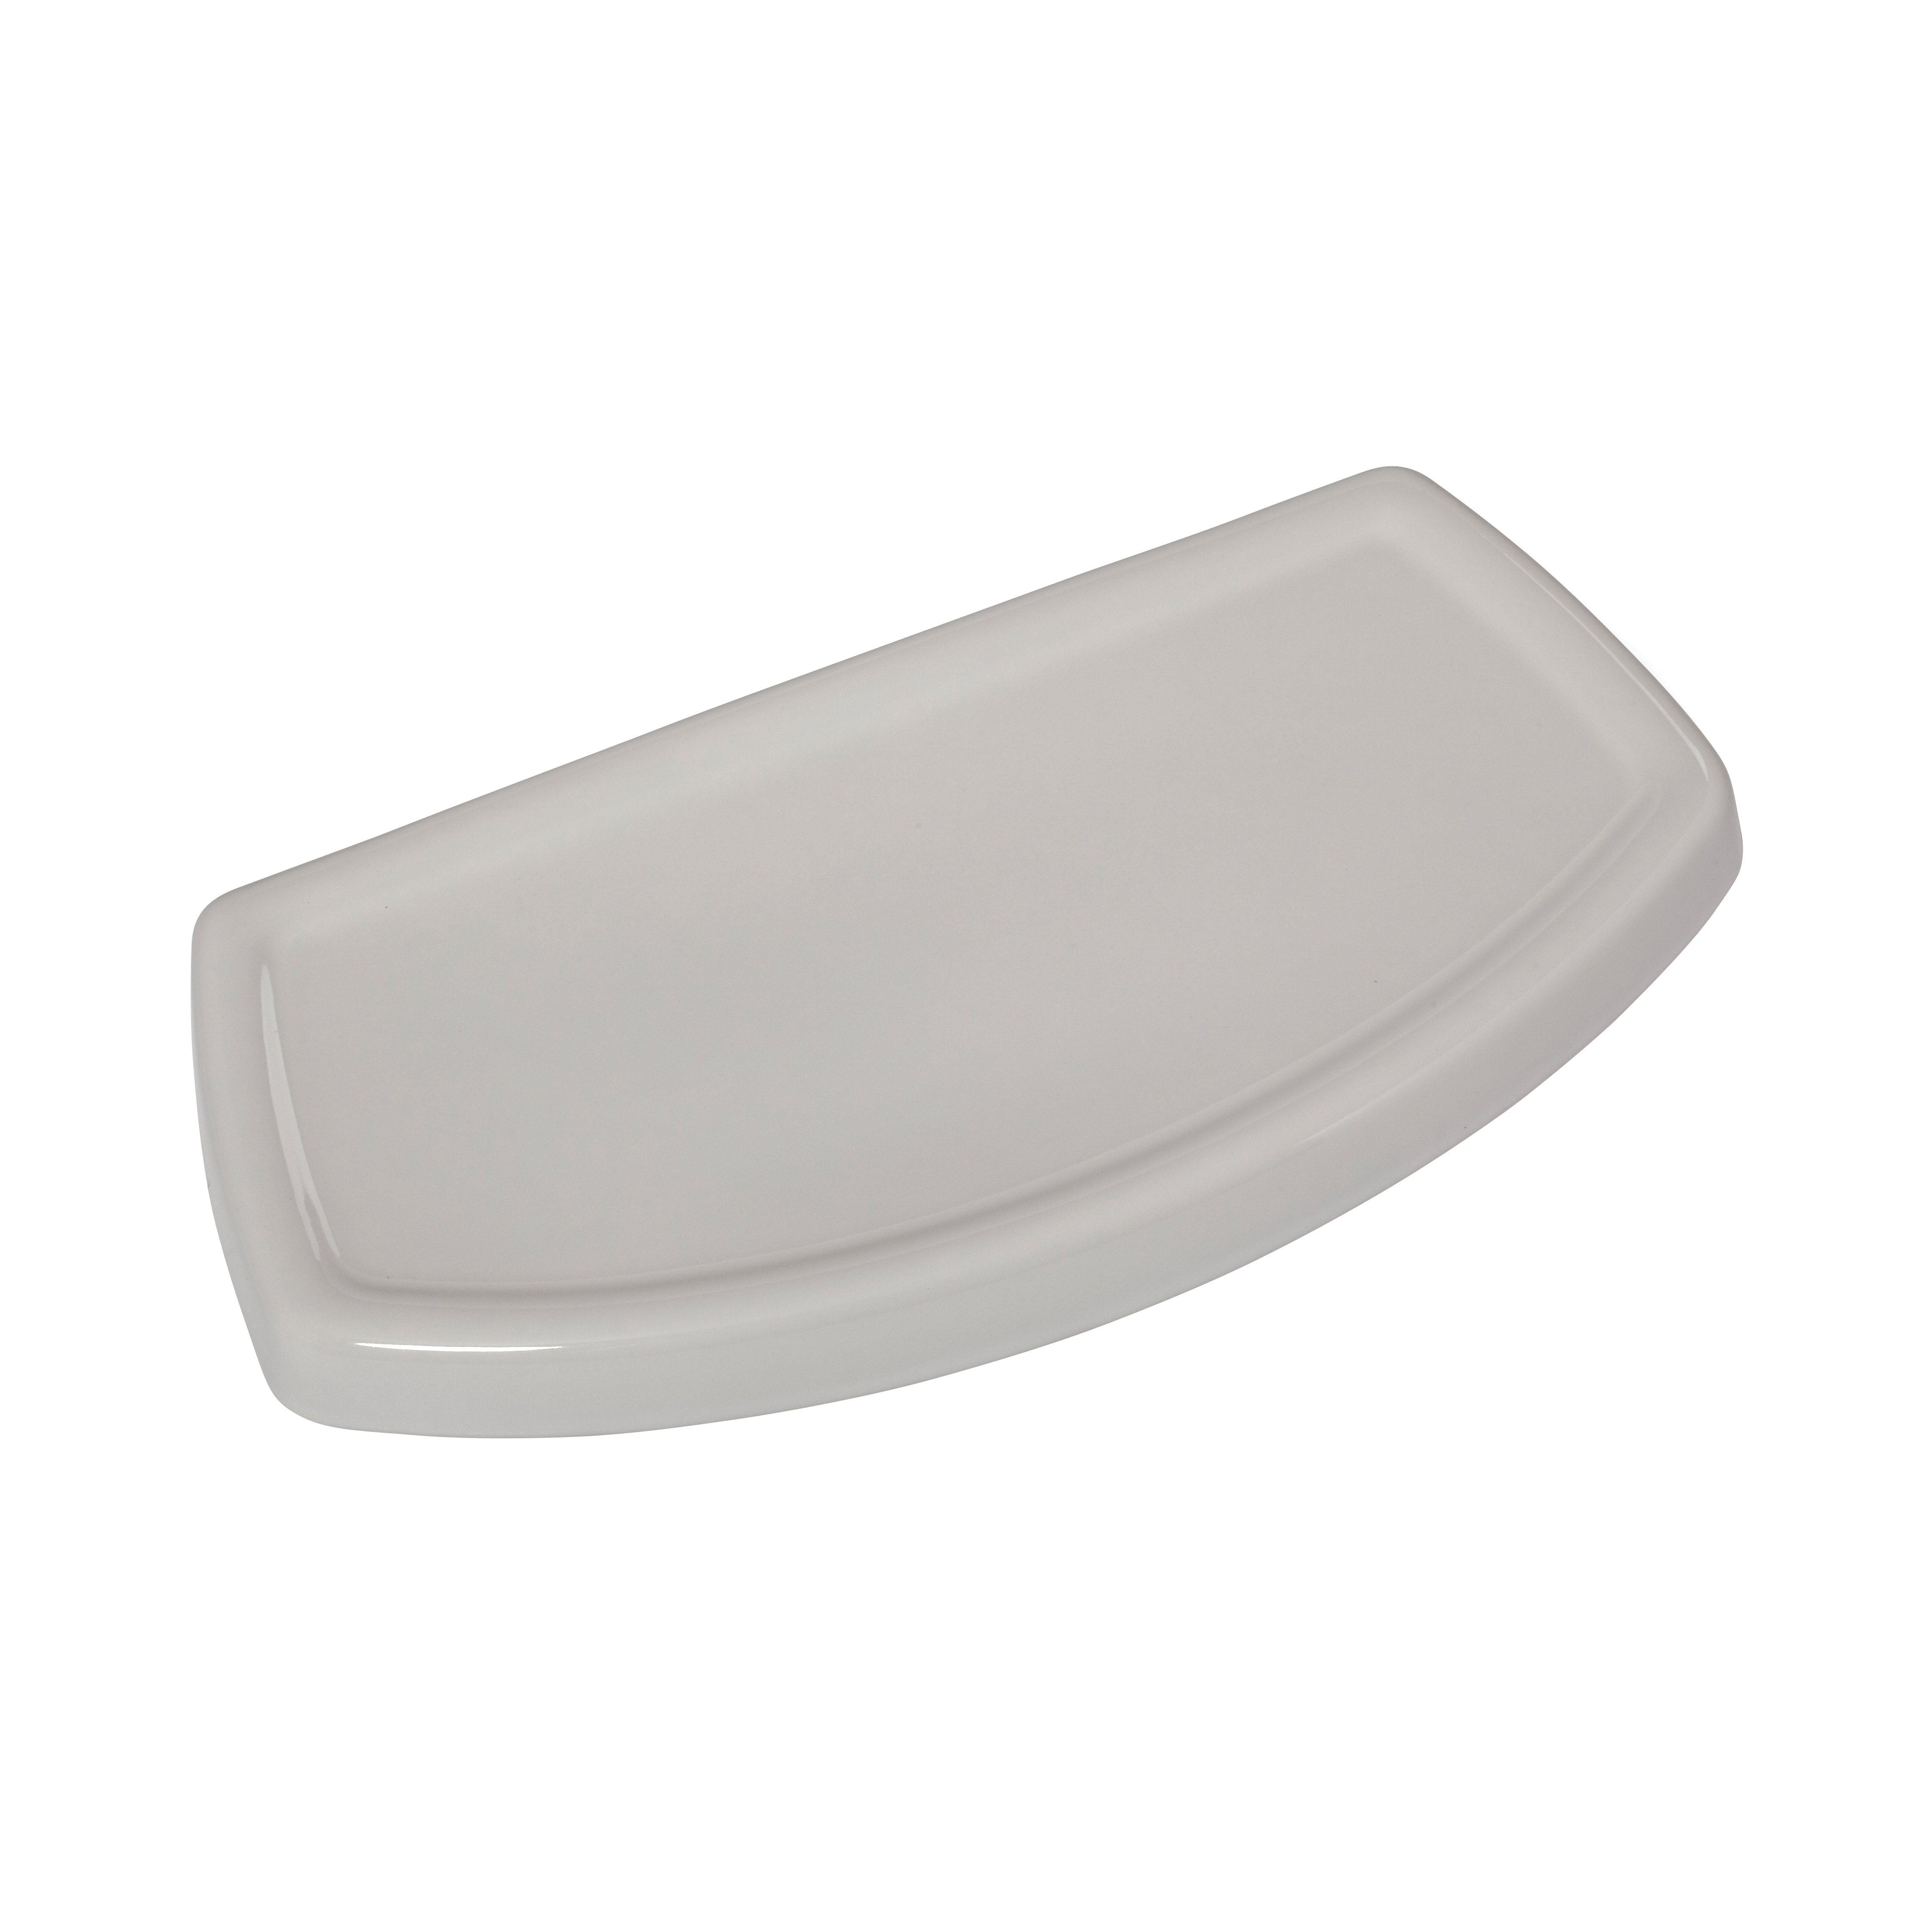 American Standard 735121-400.020 Cadet® Toilet Tank Cover, For Use With Model 4021.016 Tank, White, Import